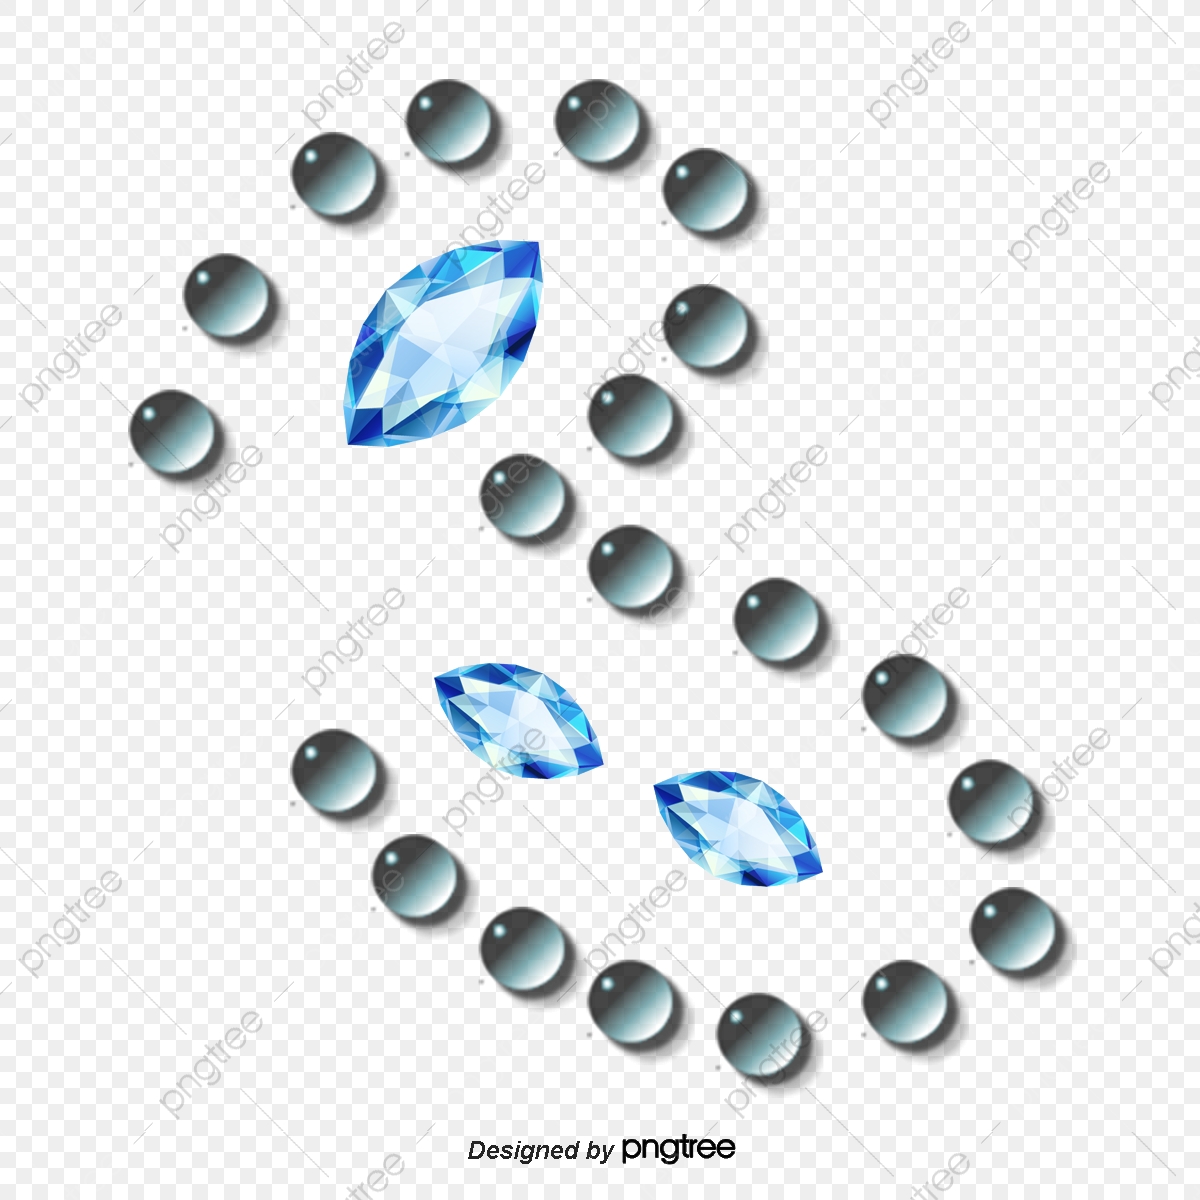 jewelry clipart vector